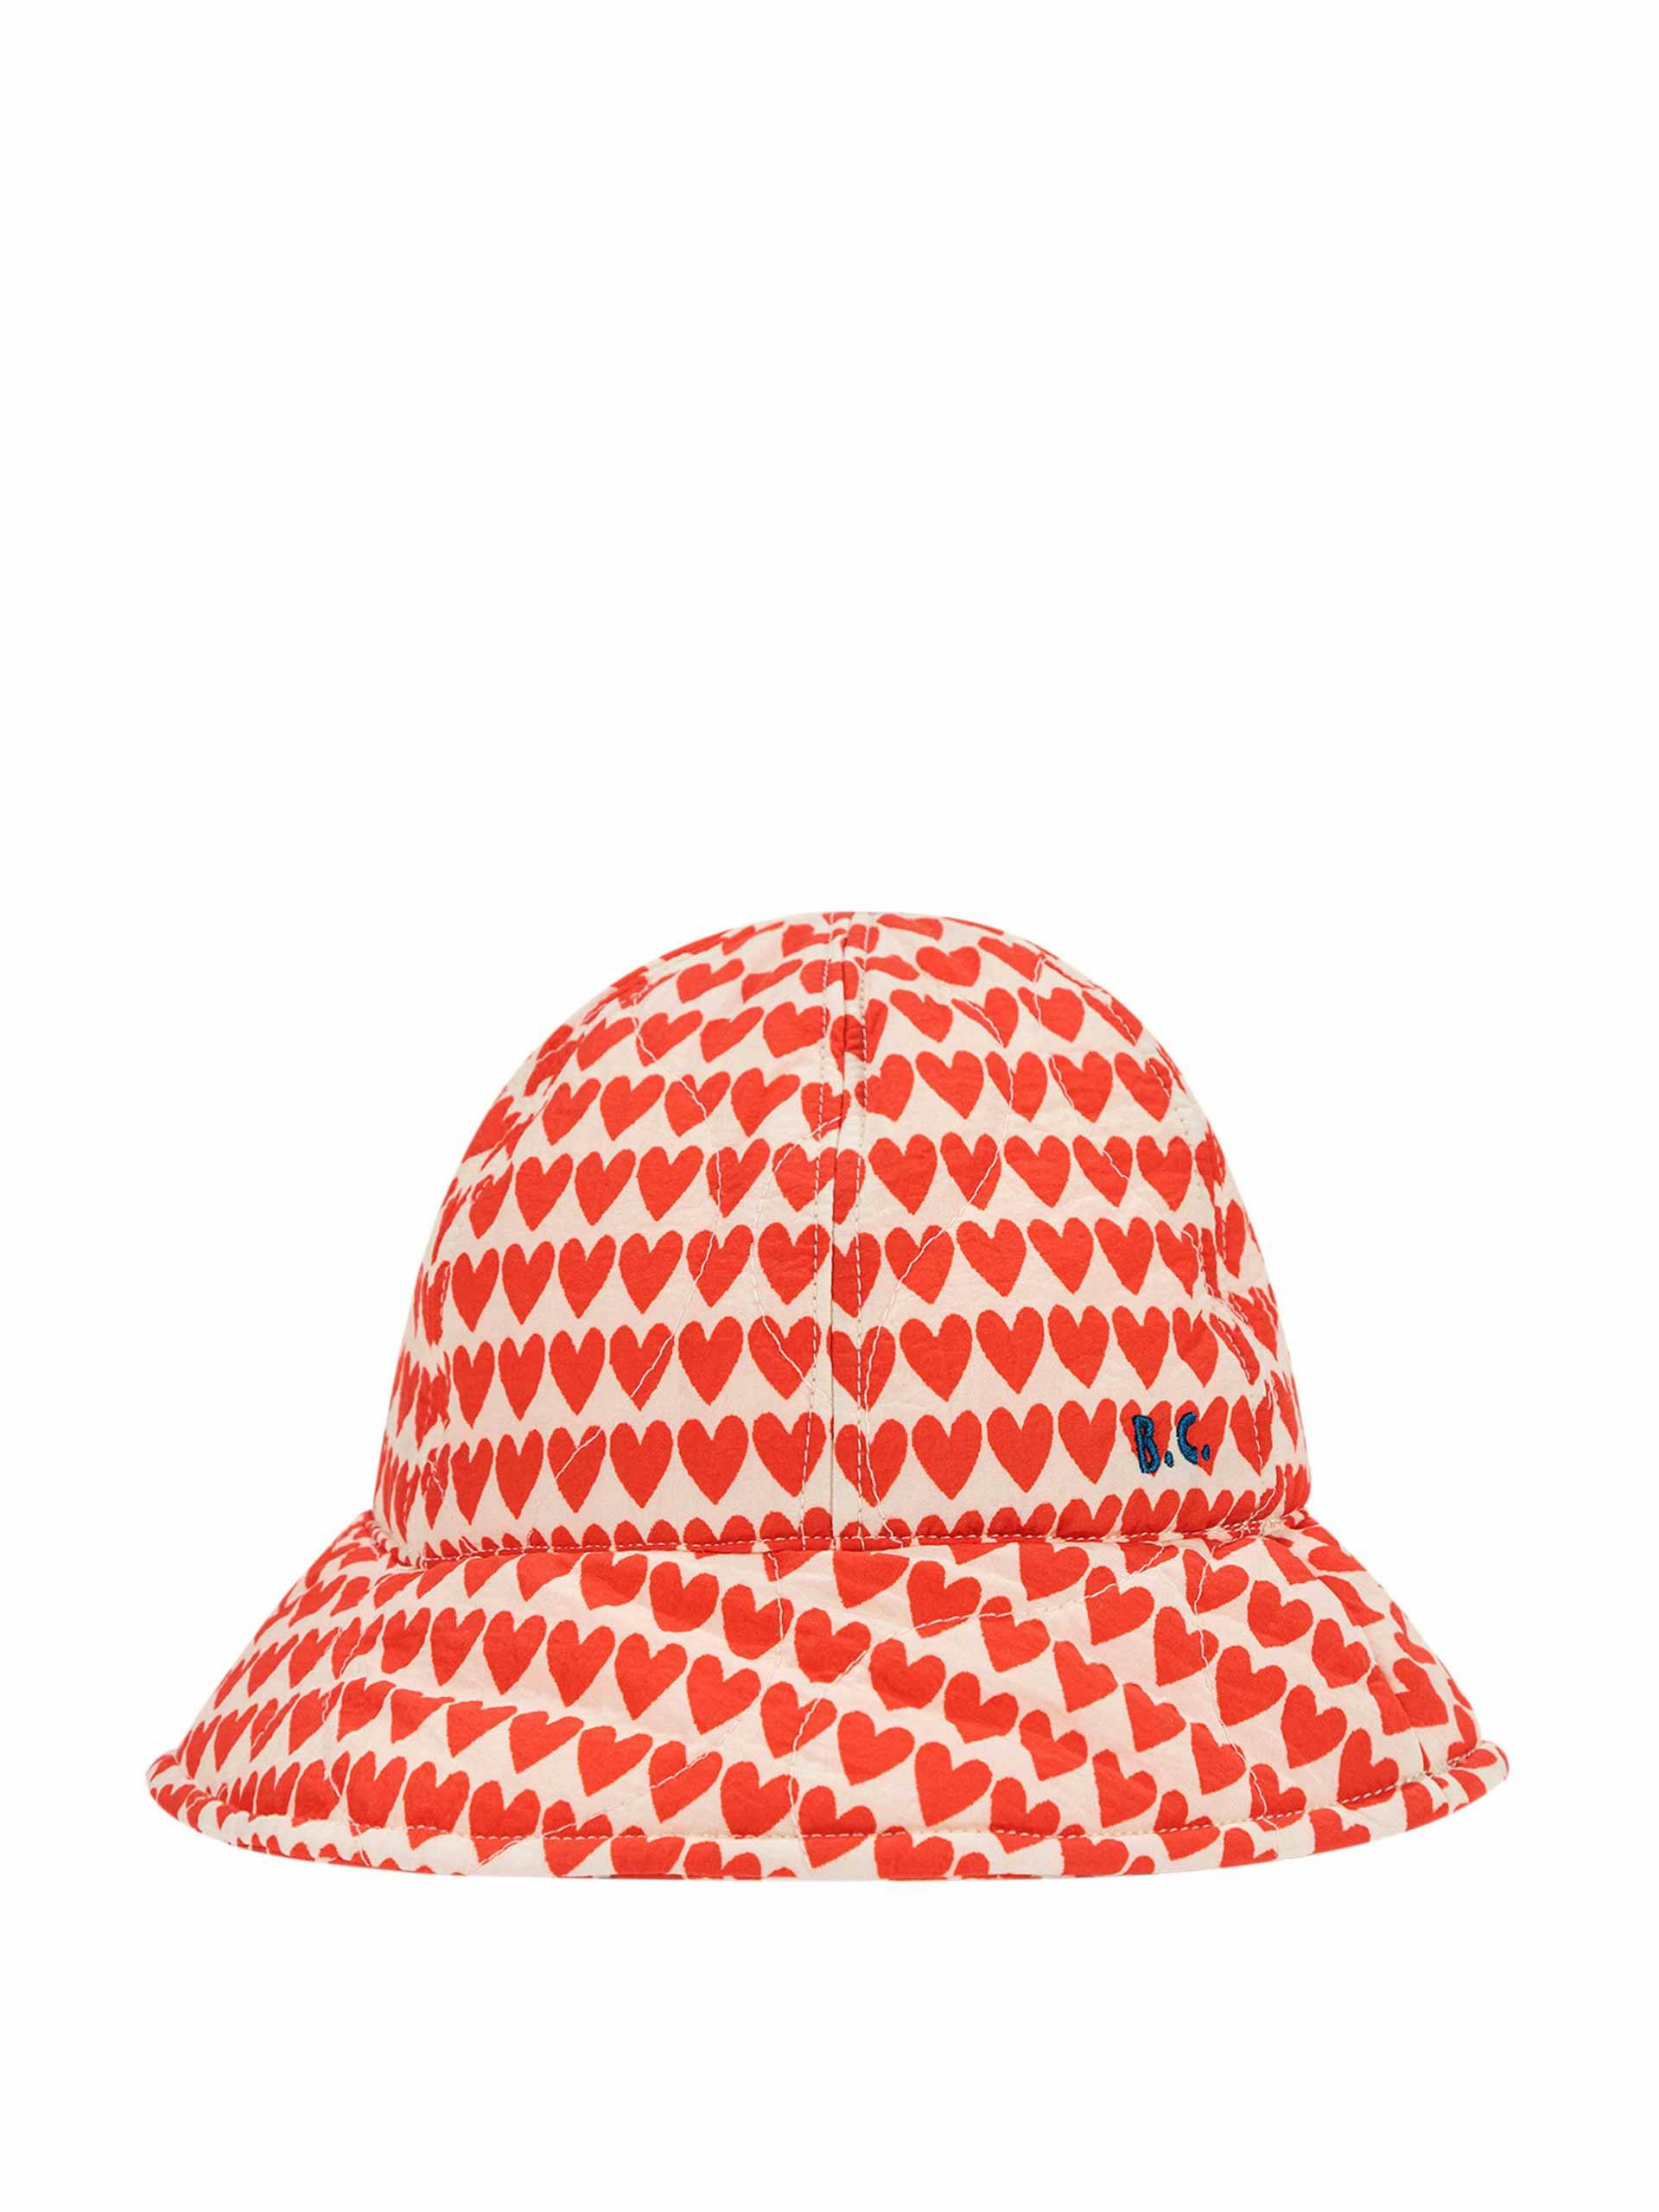 Pink and red heart hat